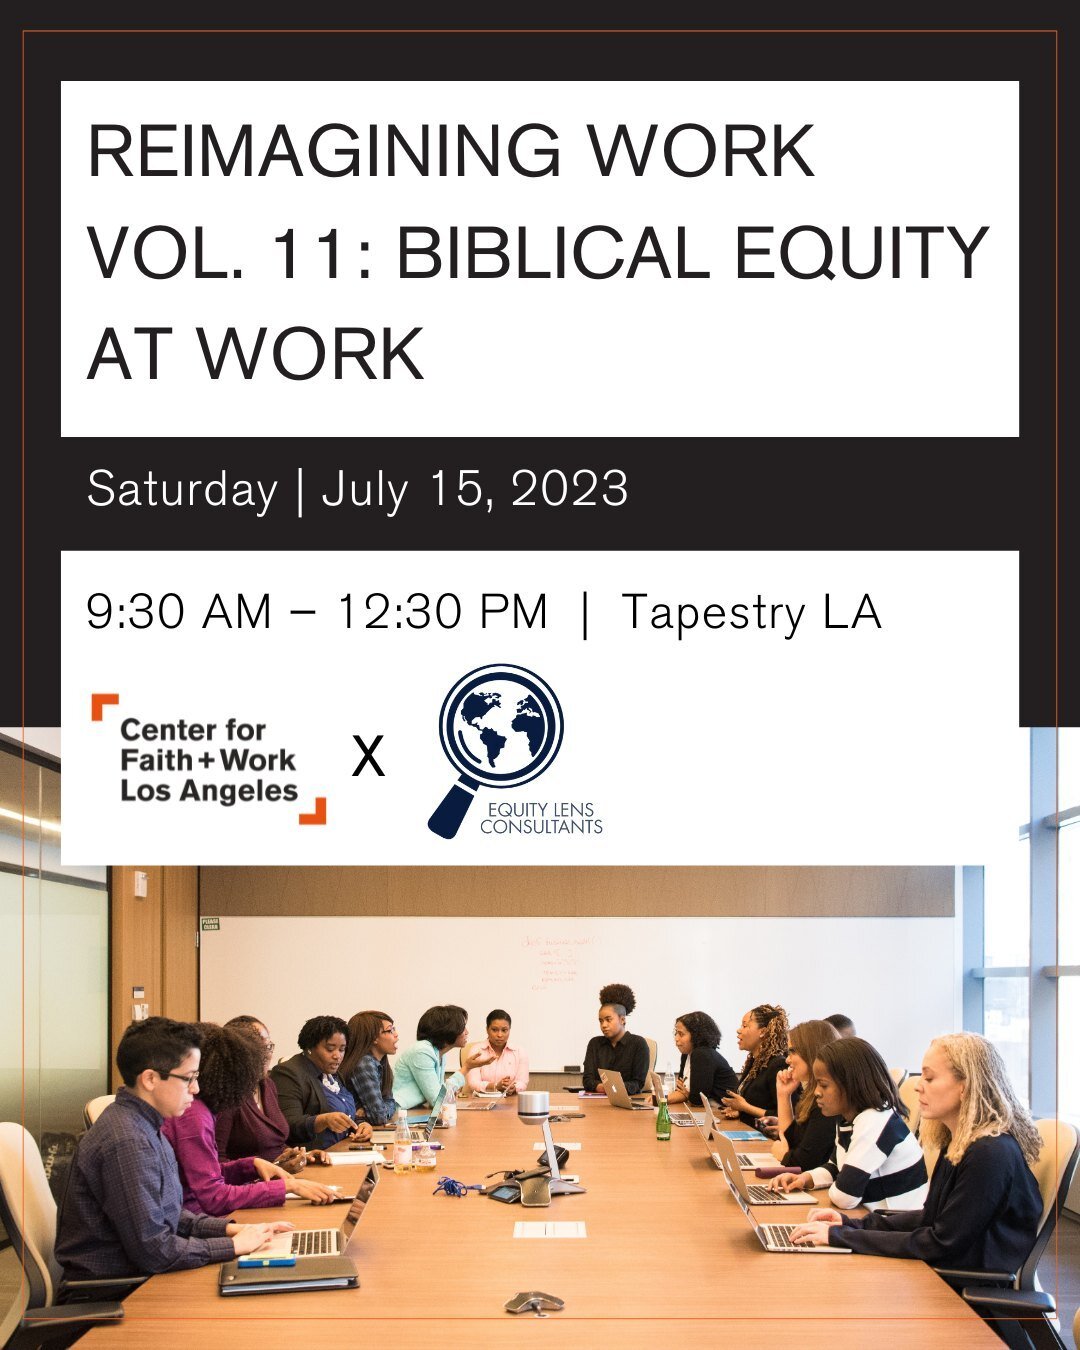 🚨ON SALE NOW 🚨 We are excited to co-host Reimagining Work Vol. 11: Biblical Equity at Work on Saturday July 15th at Tapestry LA in partnership with Myesha Reynolds from Equity Lens Consultants. This event is for anyone wanting to gain an understand